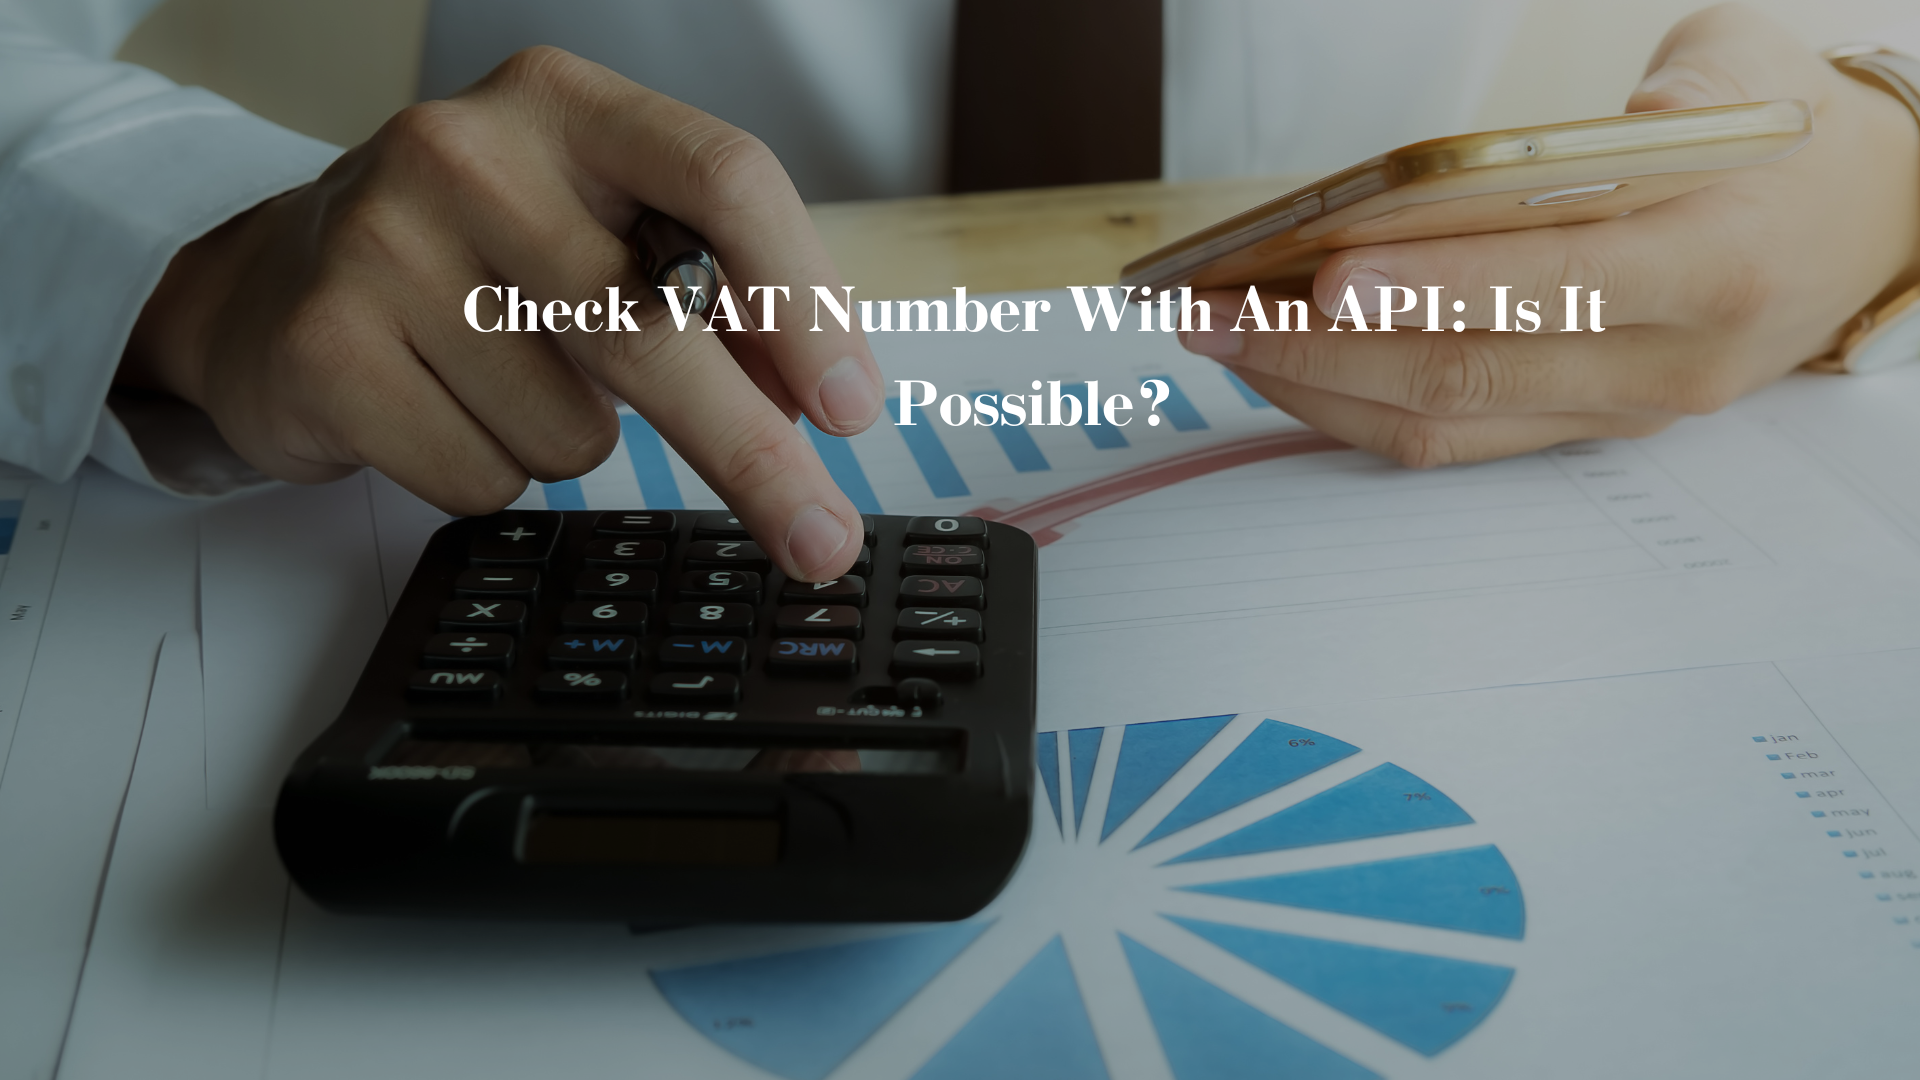 Check VAT Number With An API: Is It Possible?